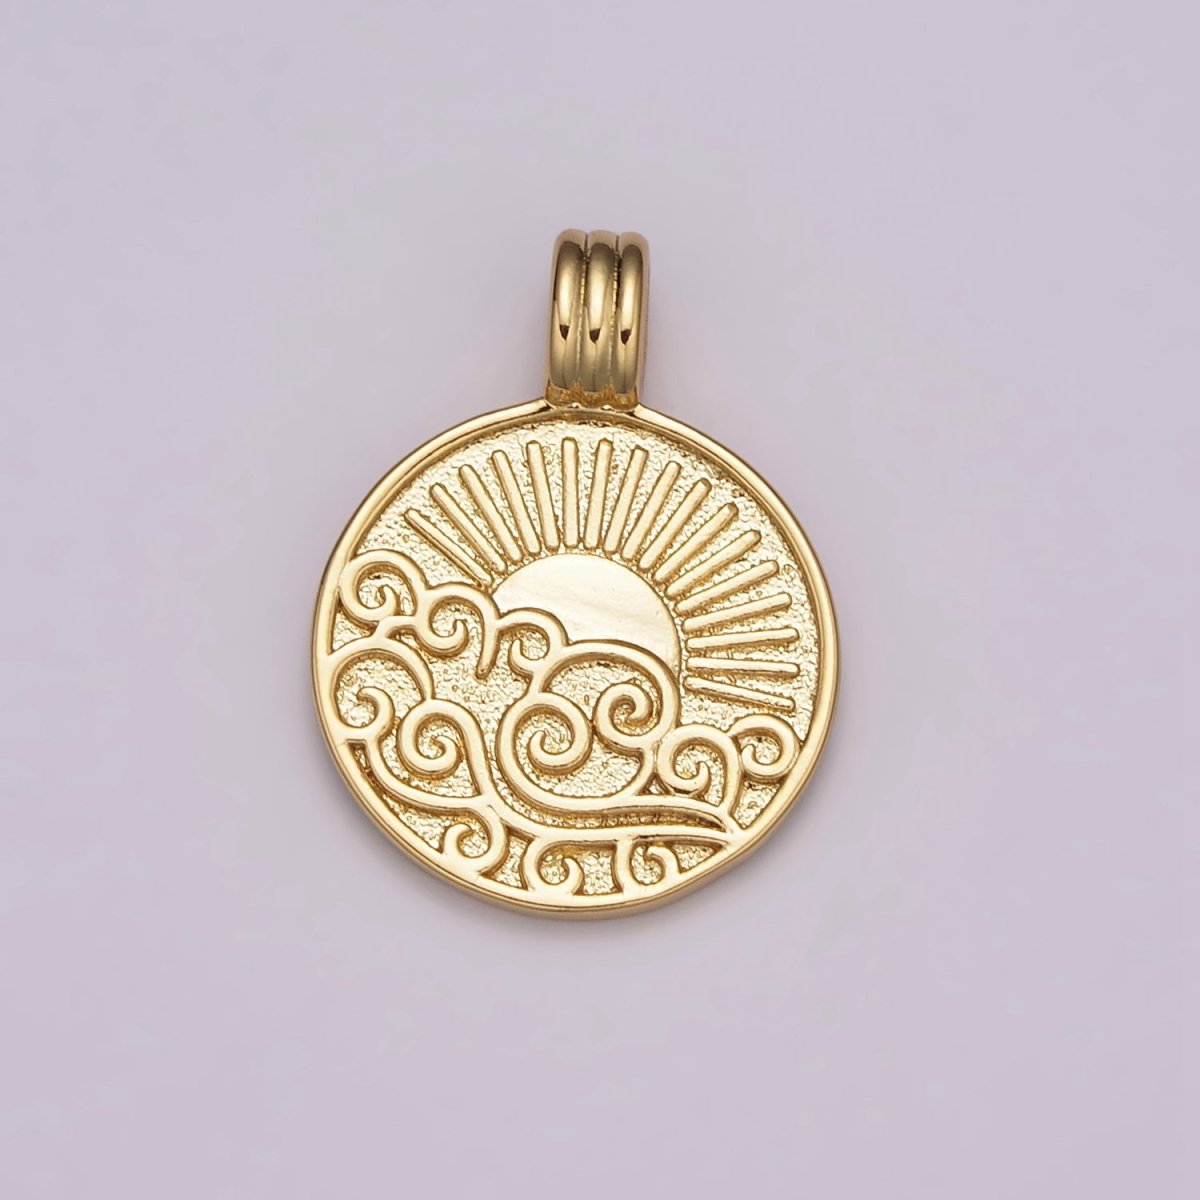 NEW ELEMENT Collection Gold Element Charm Fire Wind Earth Ocean Wave Charm 24K Gold Filled Medallion for Necklace Bracelet Supply N-469 - N-472 - DLUXCA